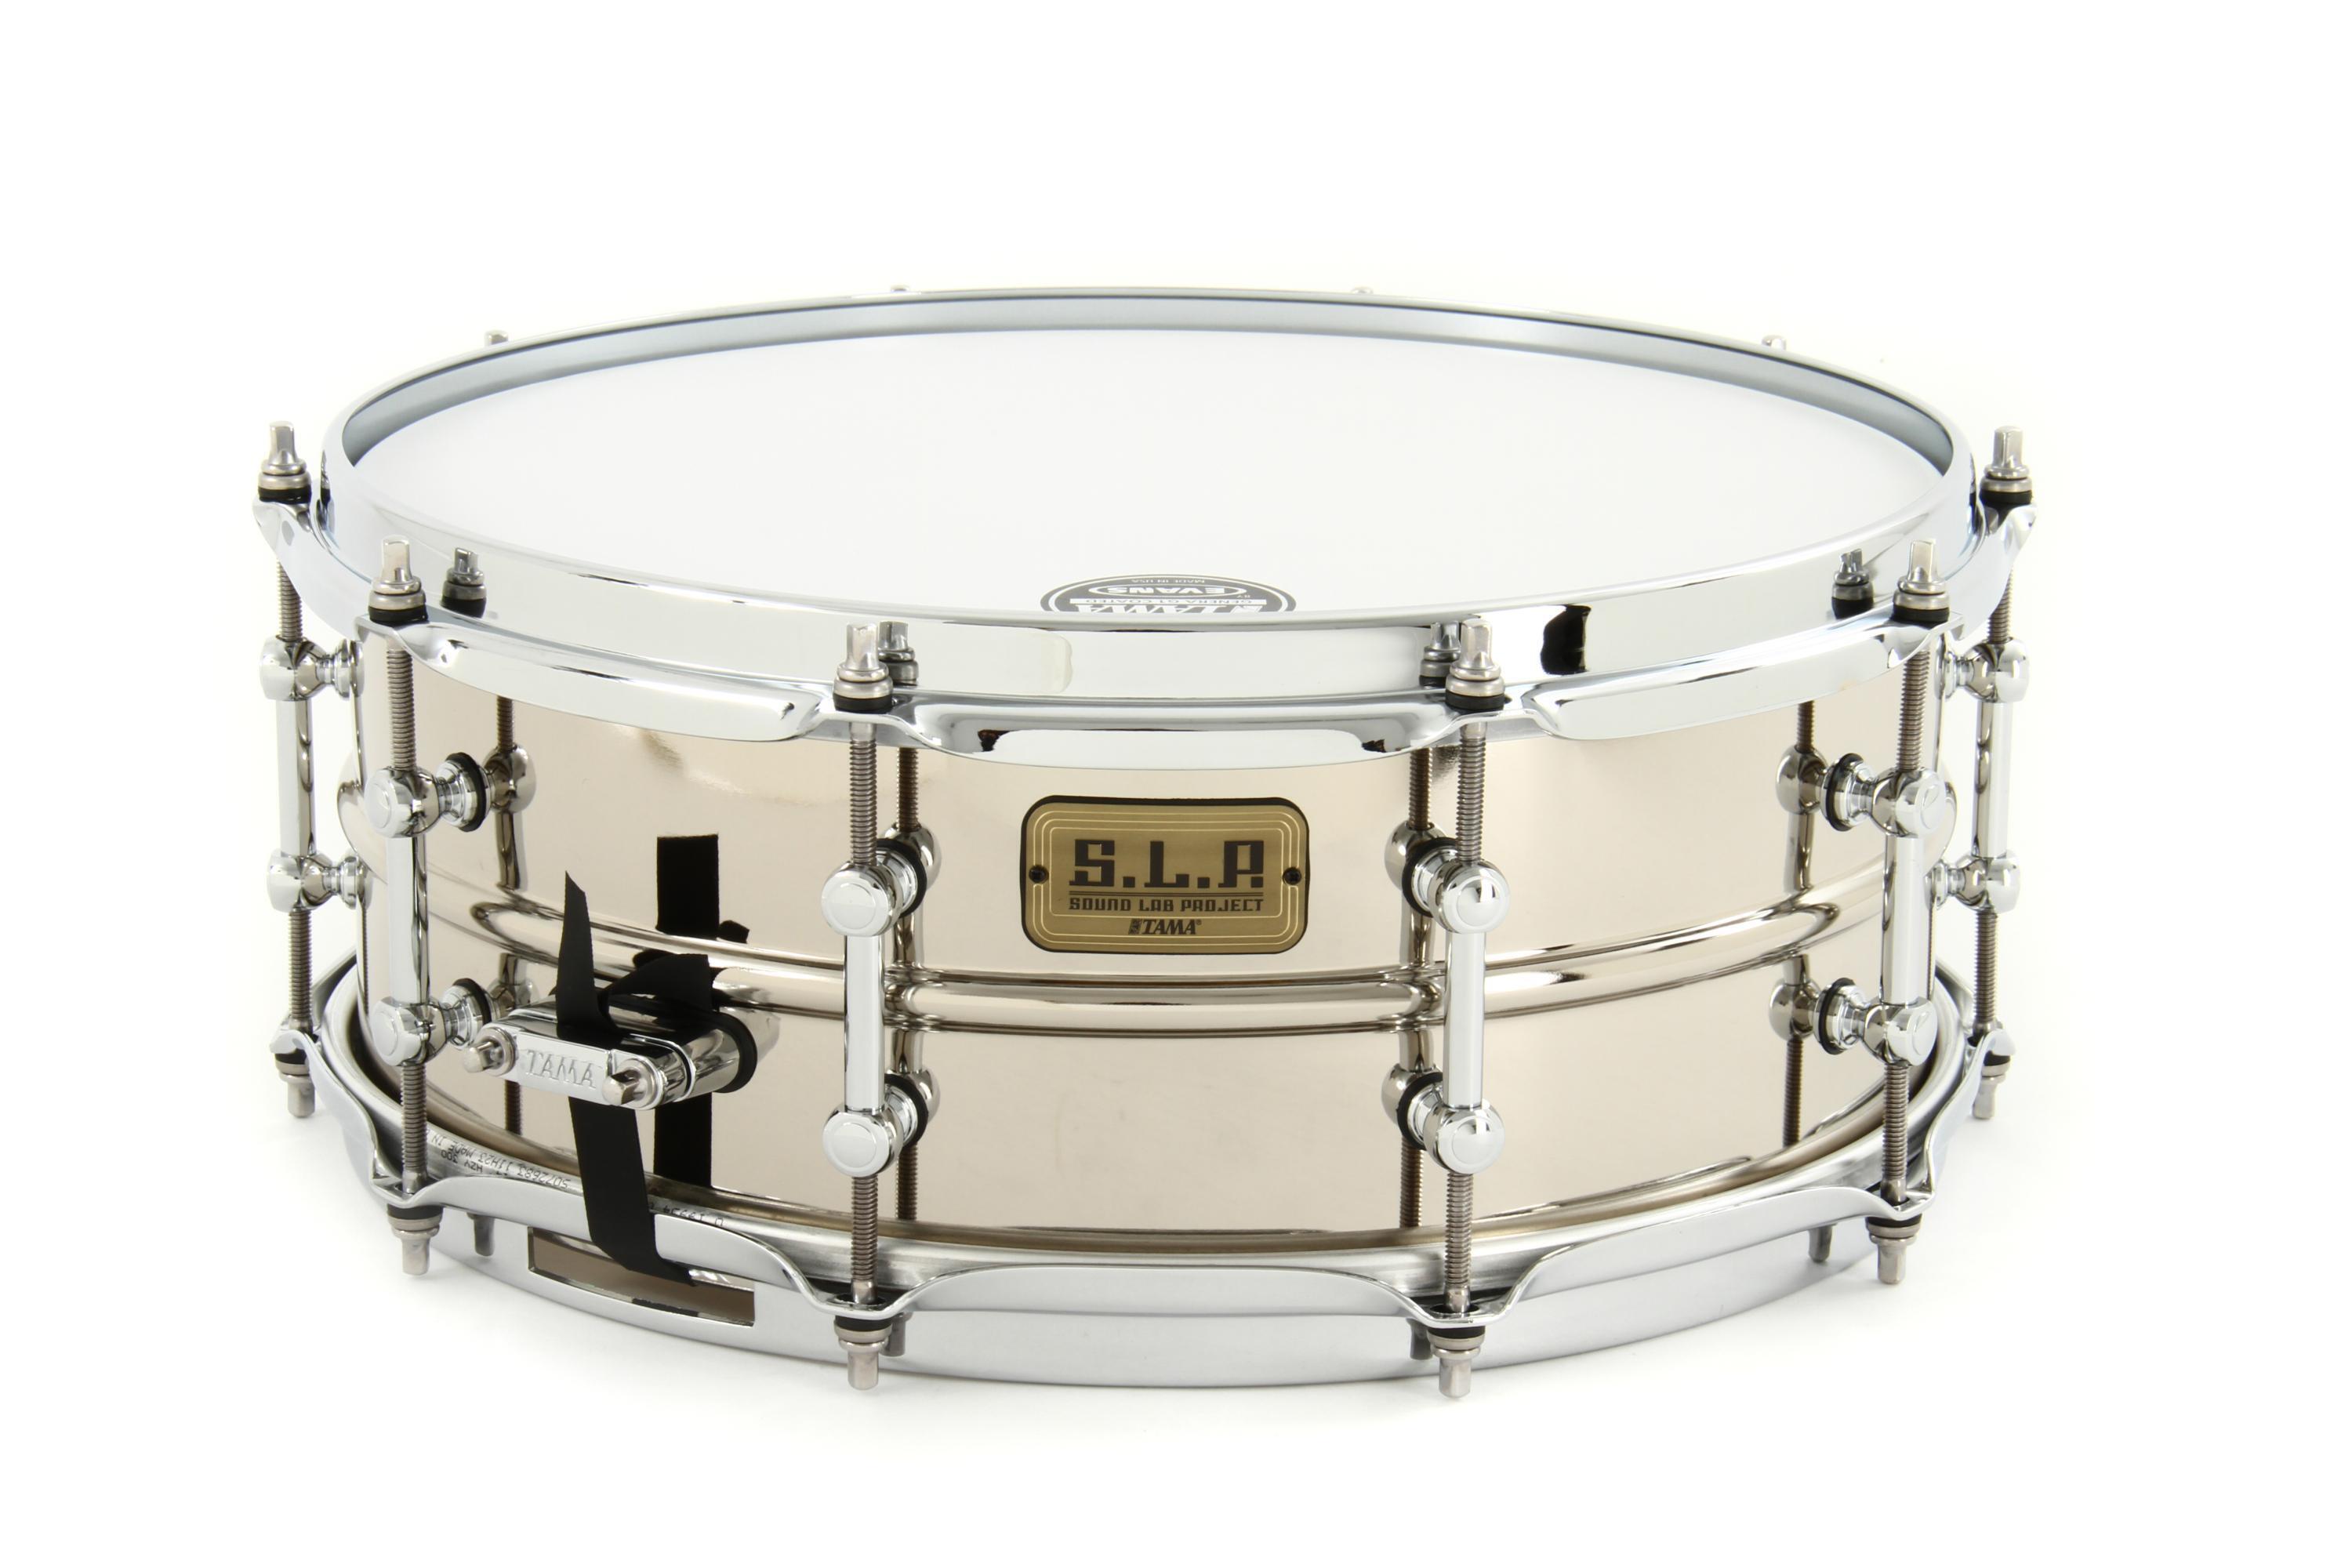 Tama Stainless Steel Snare 14x5.5“ ｽﾃﾝﾚｽ-